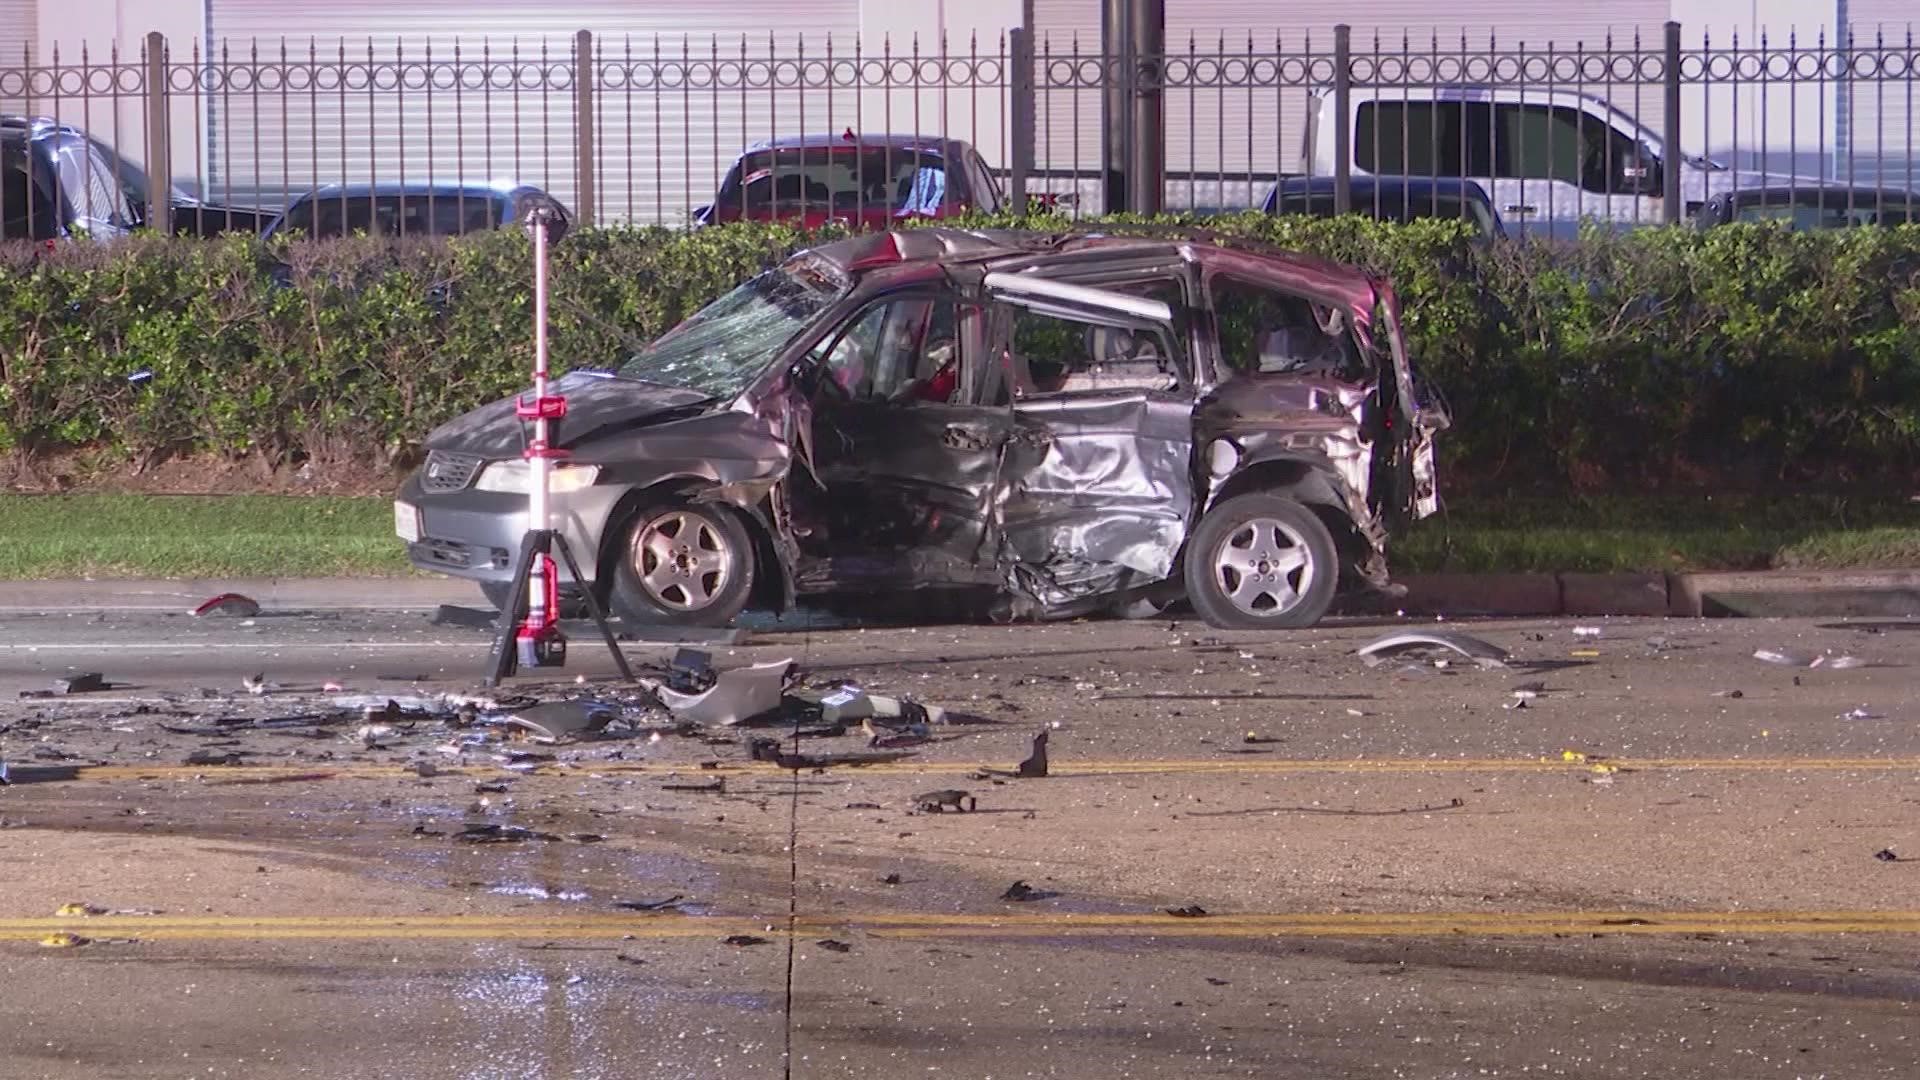 HCSO says the teens were going at a high rate of speed when they crashed into another car, killing the driver.